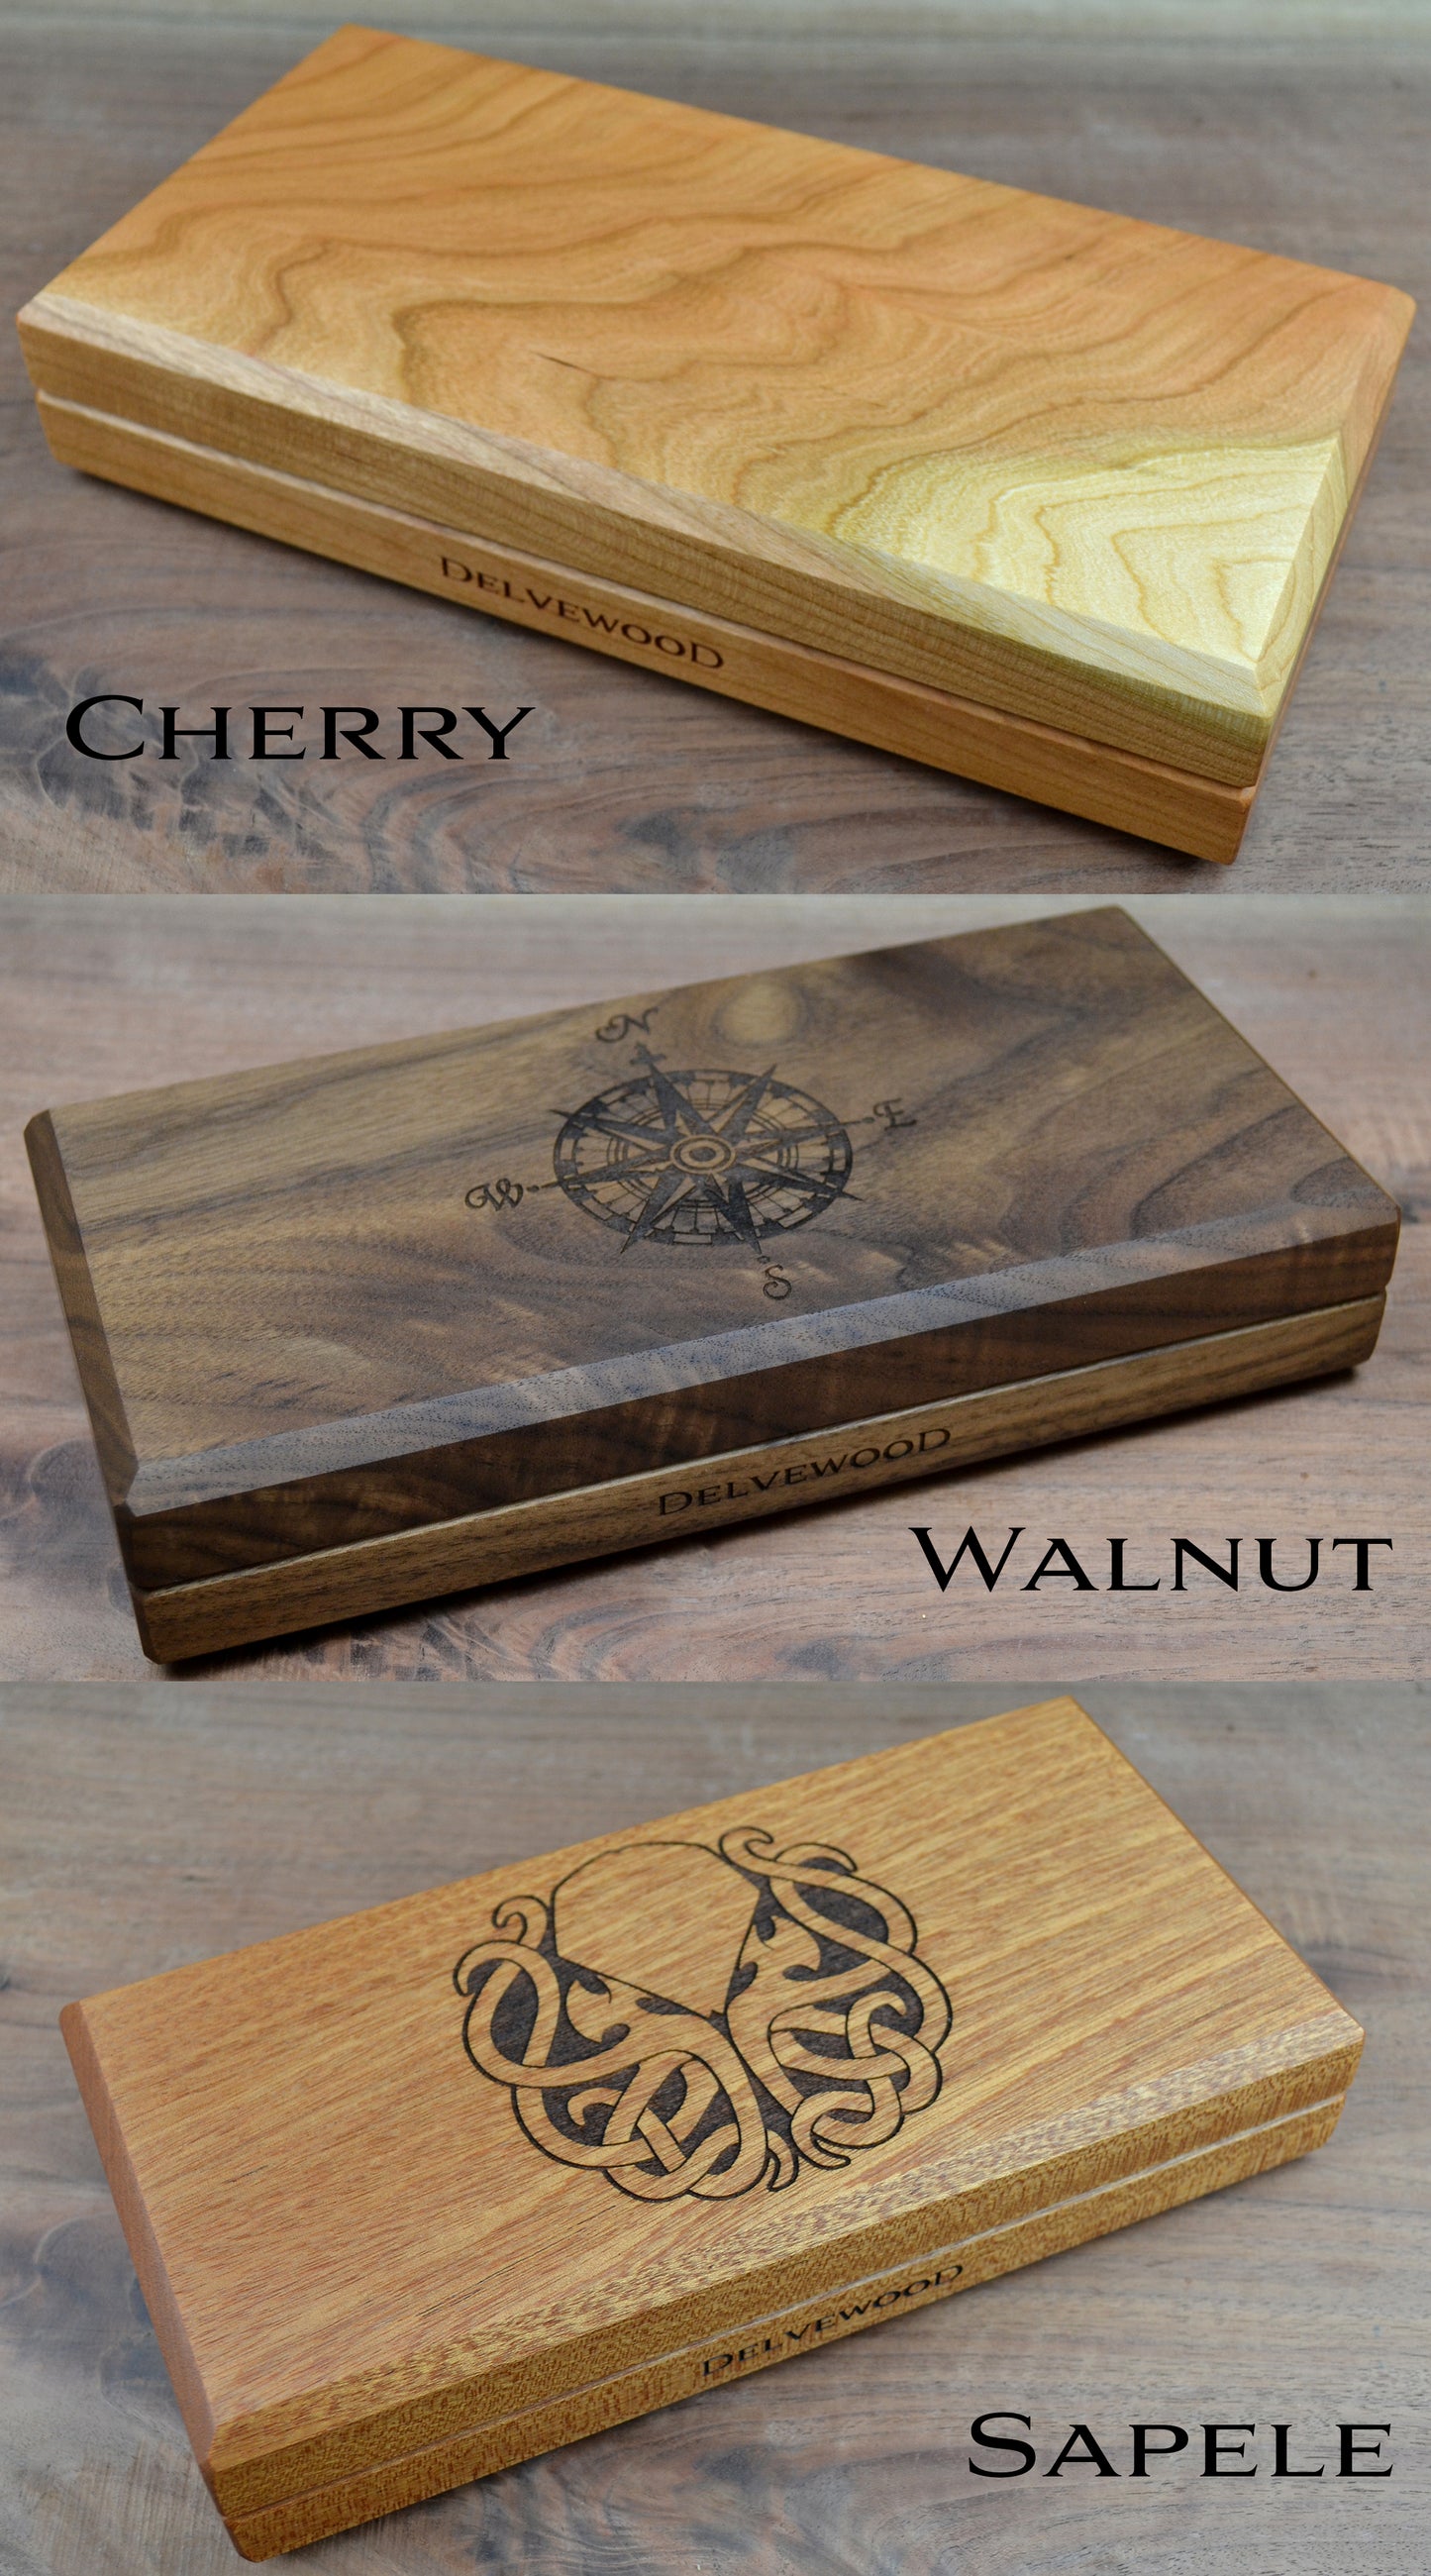 Delver's kit dice box and tray wood examples of cherry, walnut, and sapele